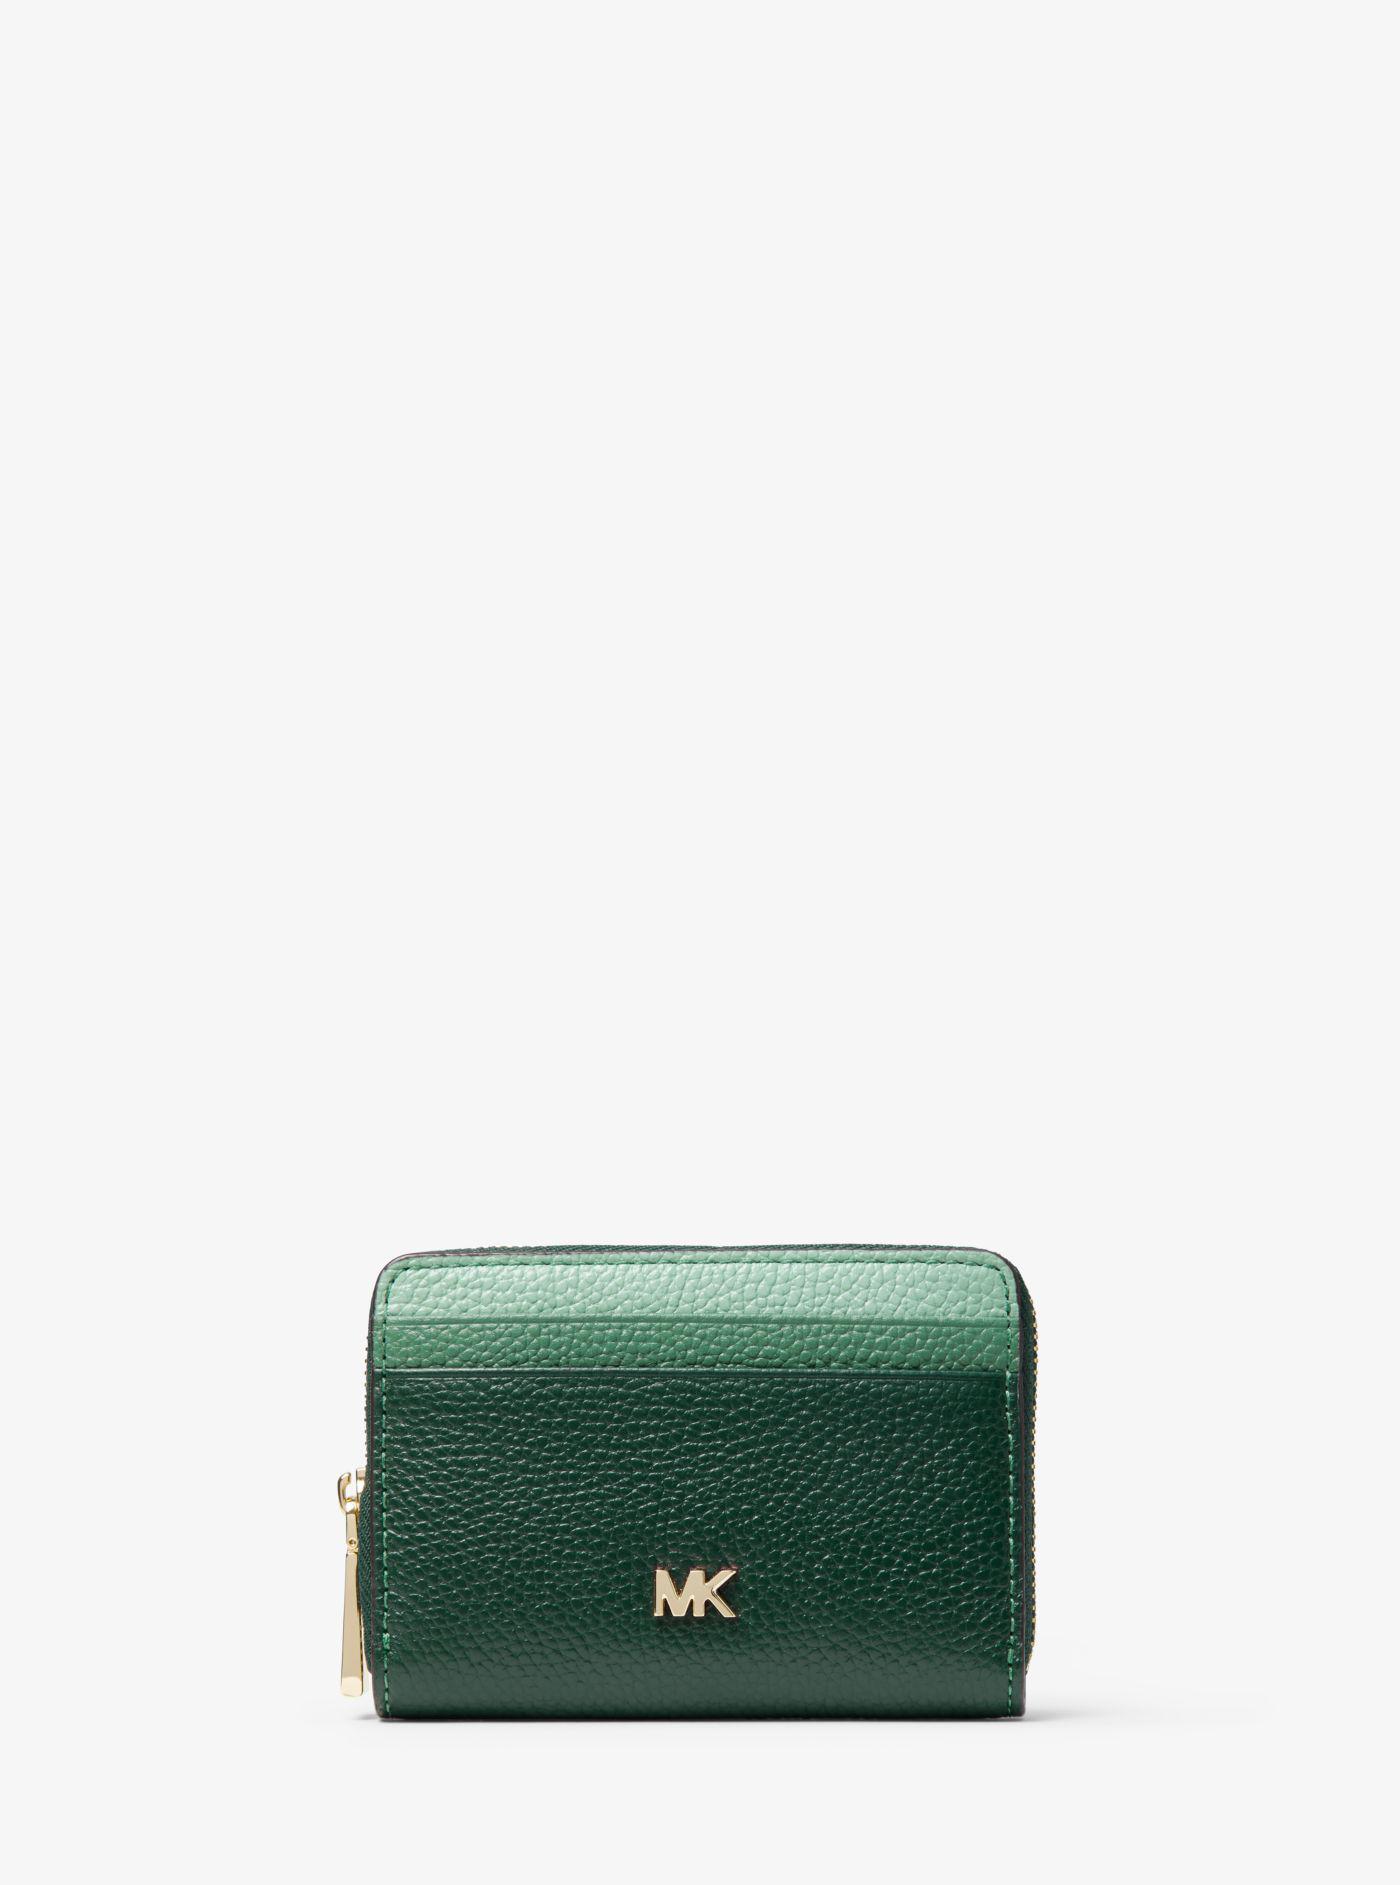 michael kors small trifold wallet